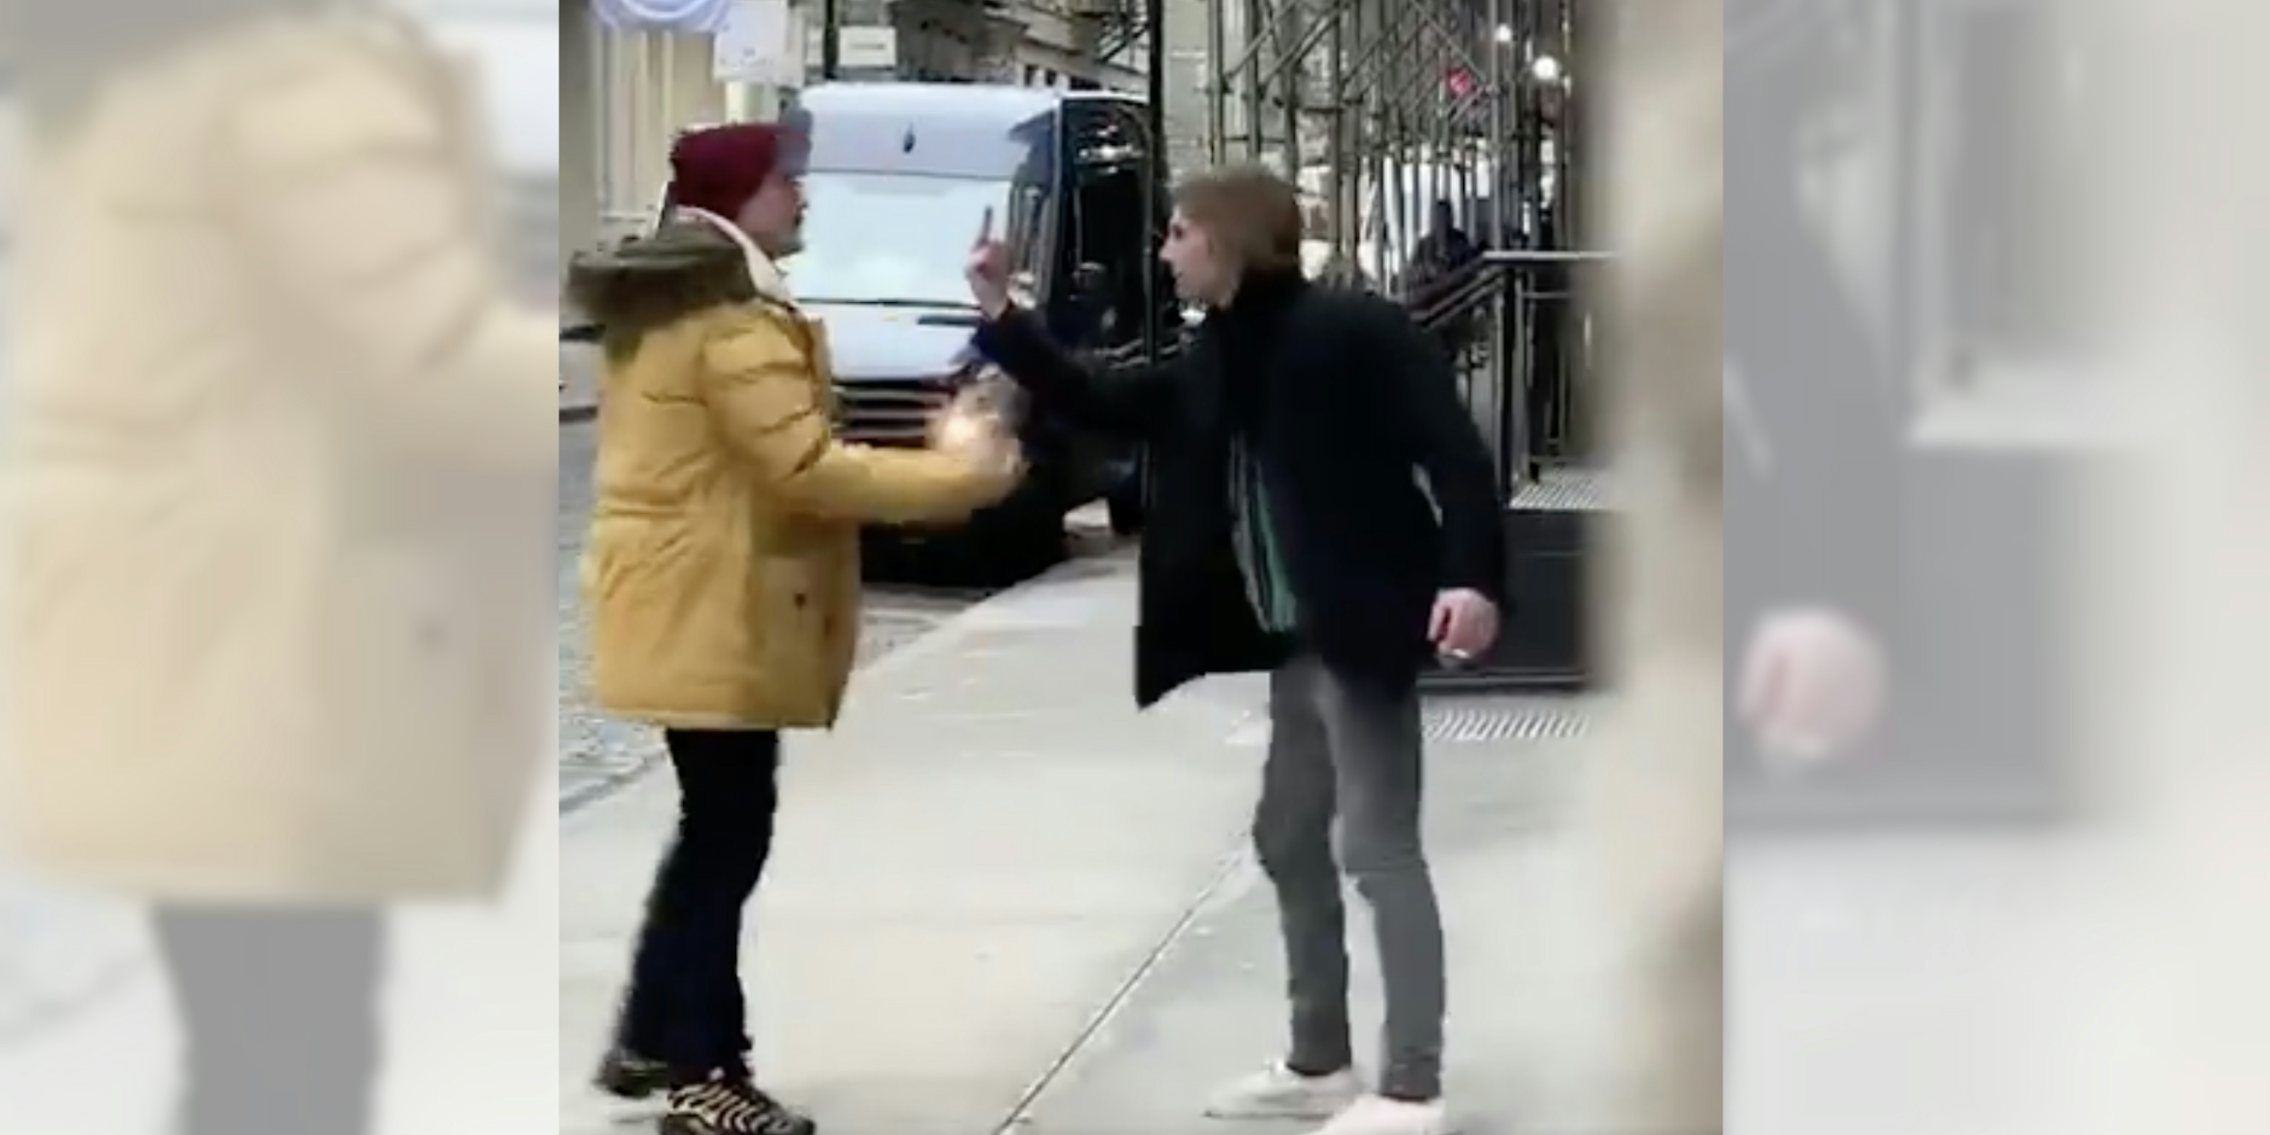 This viral middle finger fight was staged.